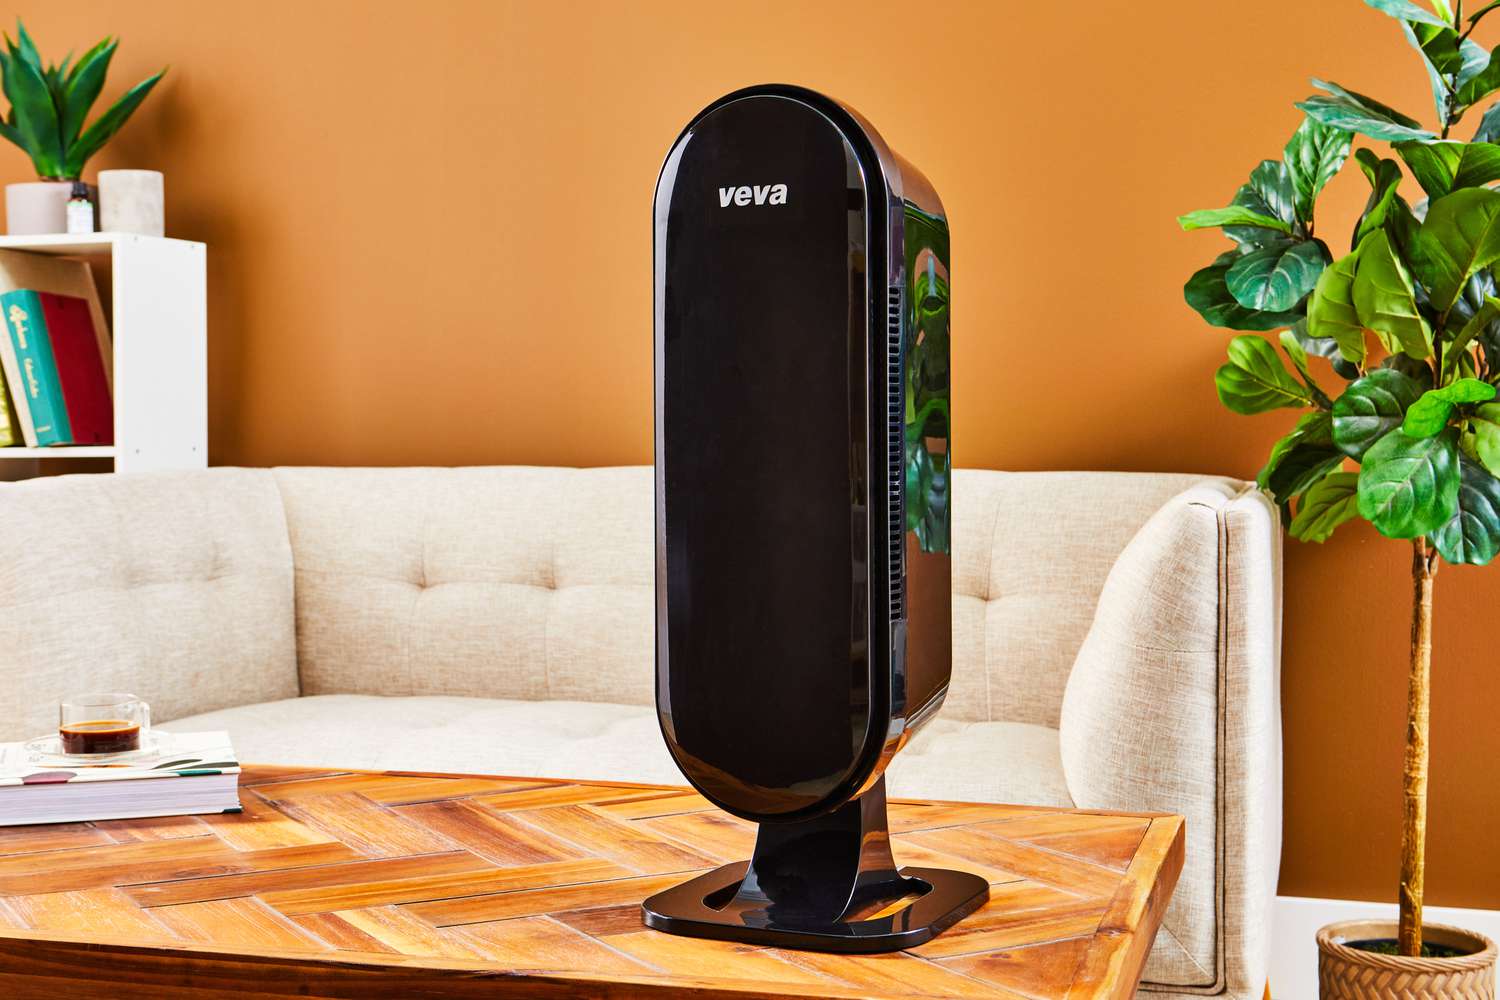 The VEVA 8000 Black Air Purifier on a wooden table